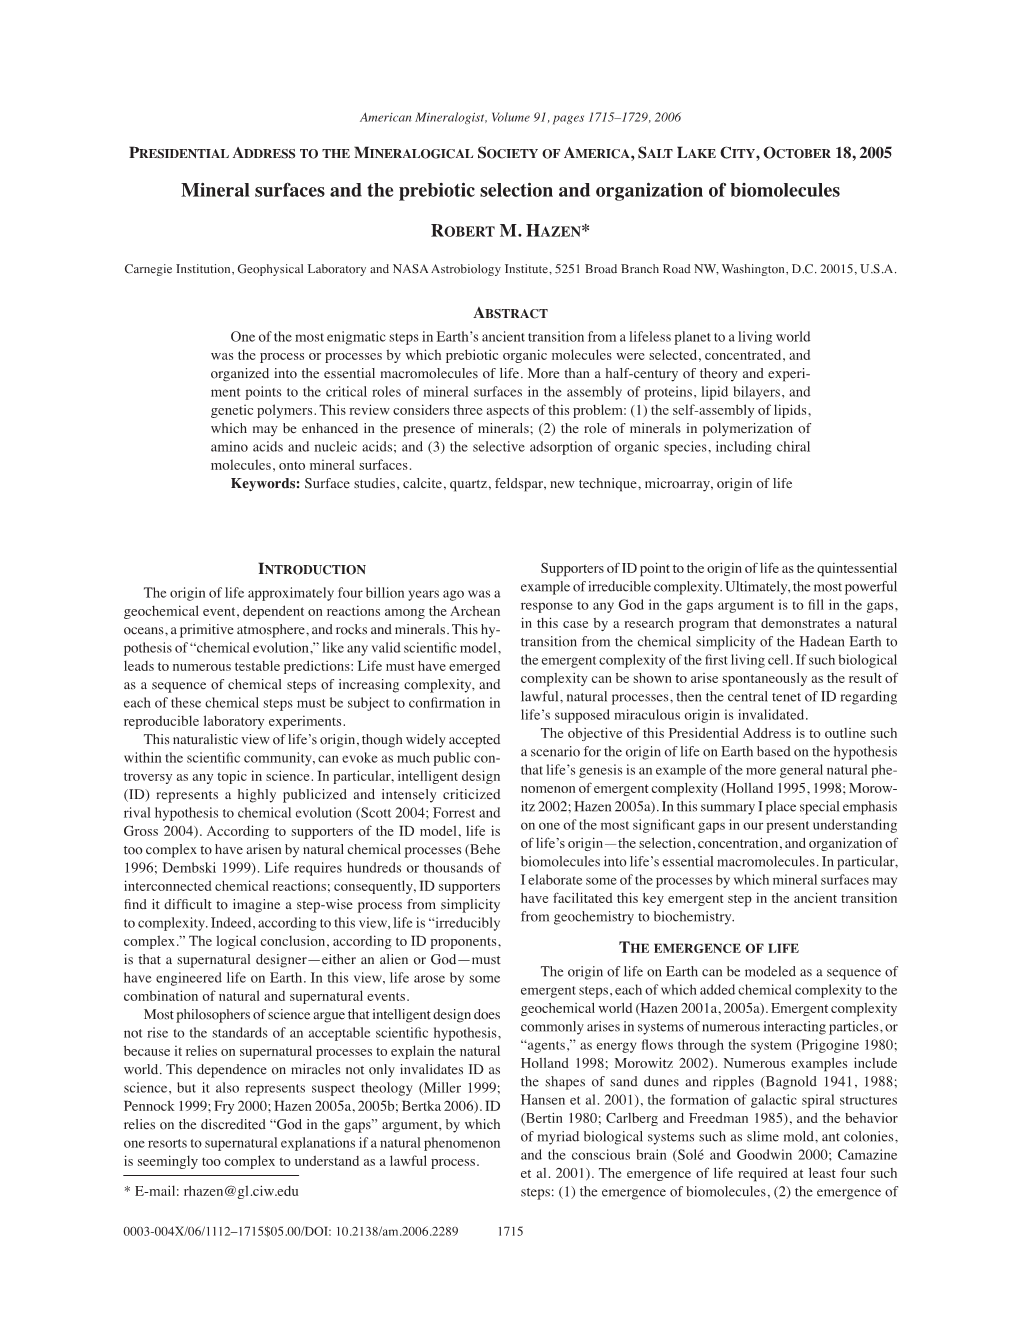 Mineral Surfaces and the Prebiotic Selection and Organization of Biomolecules